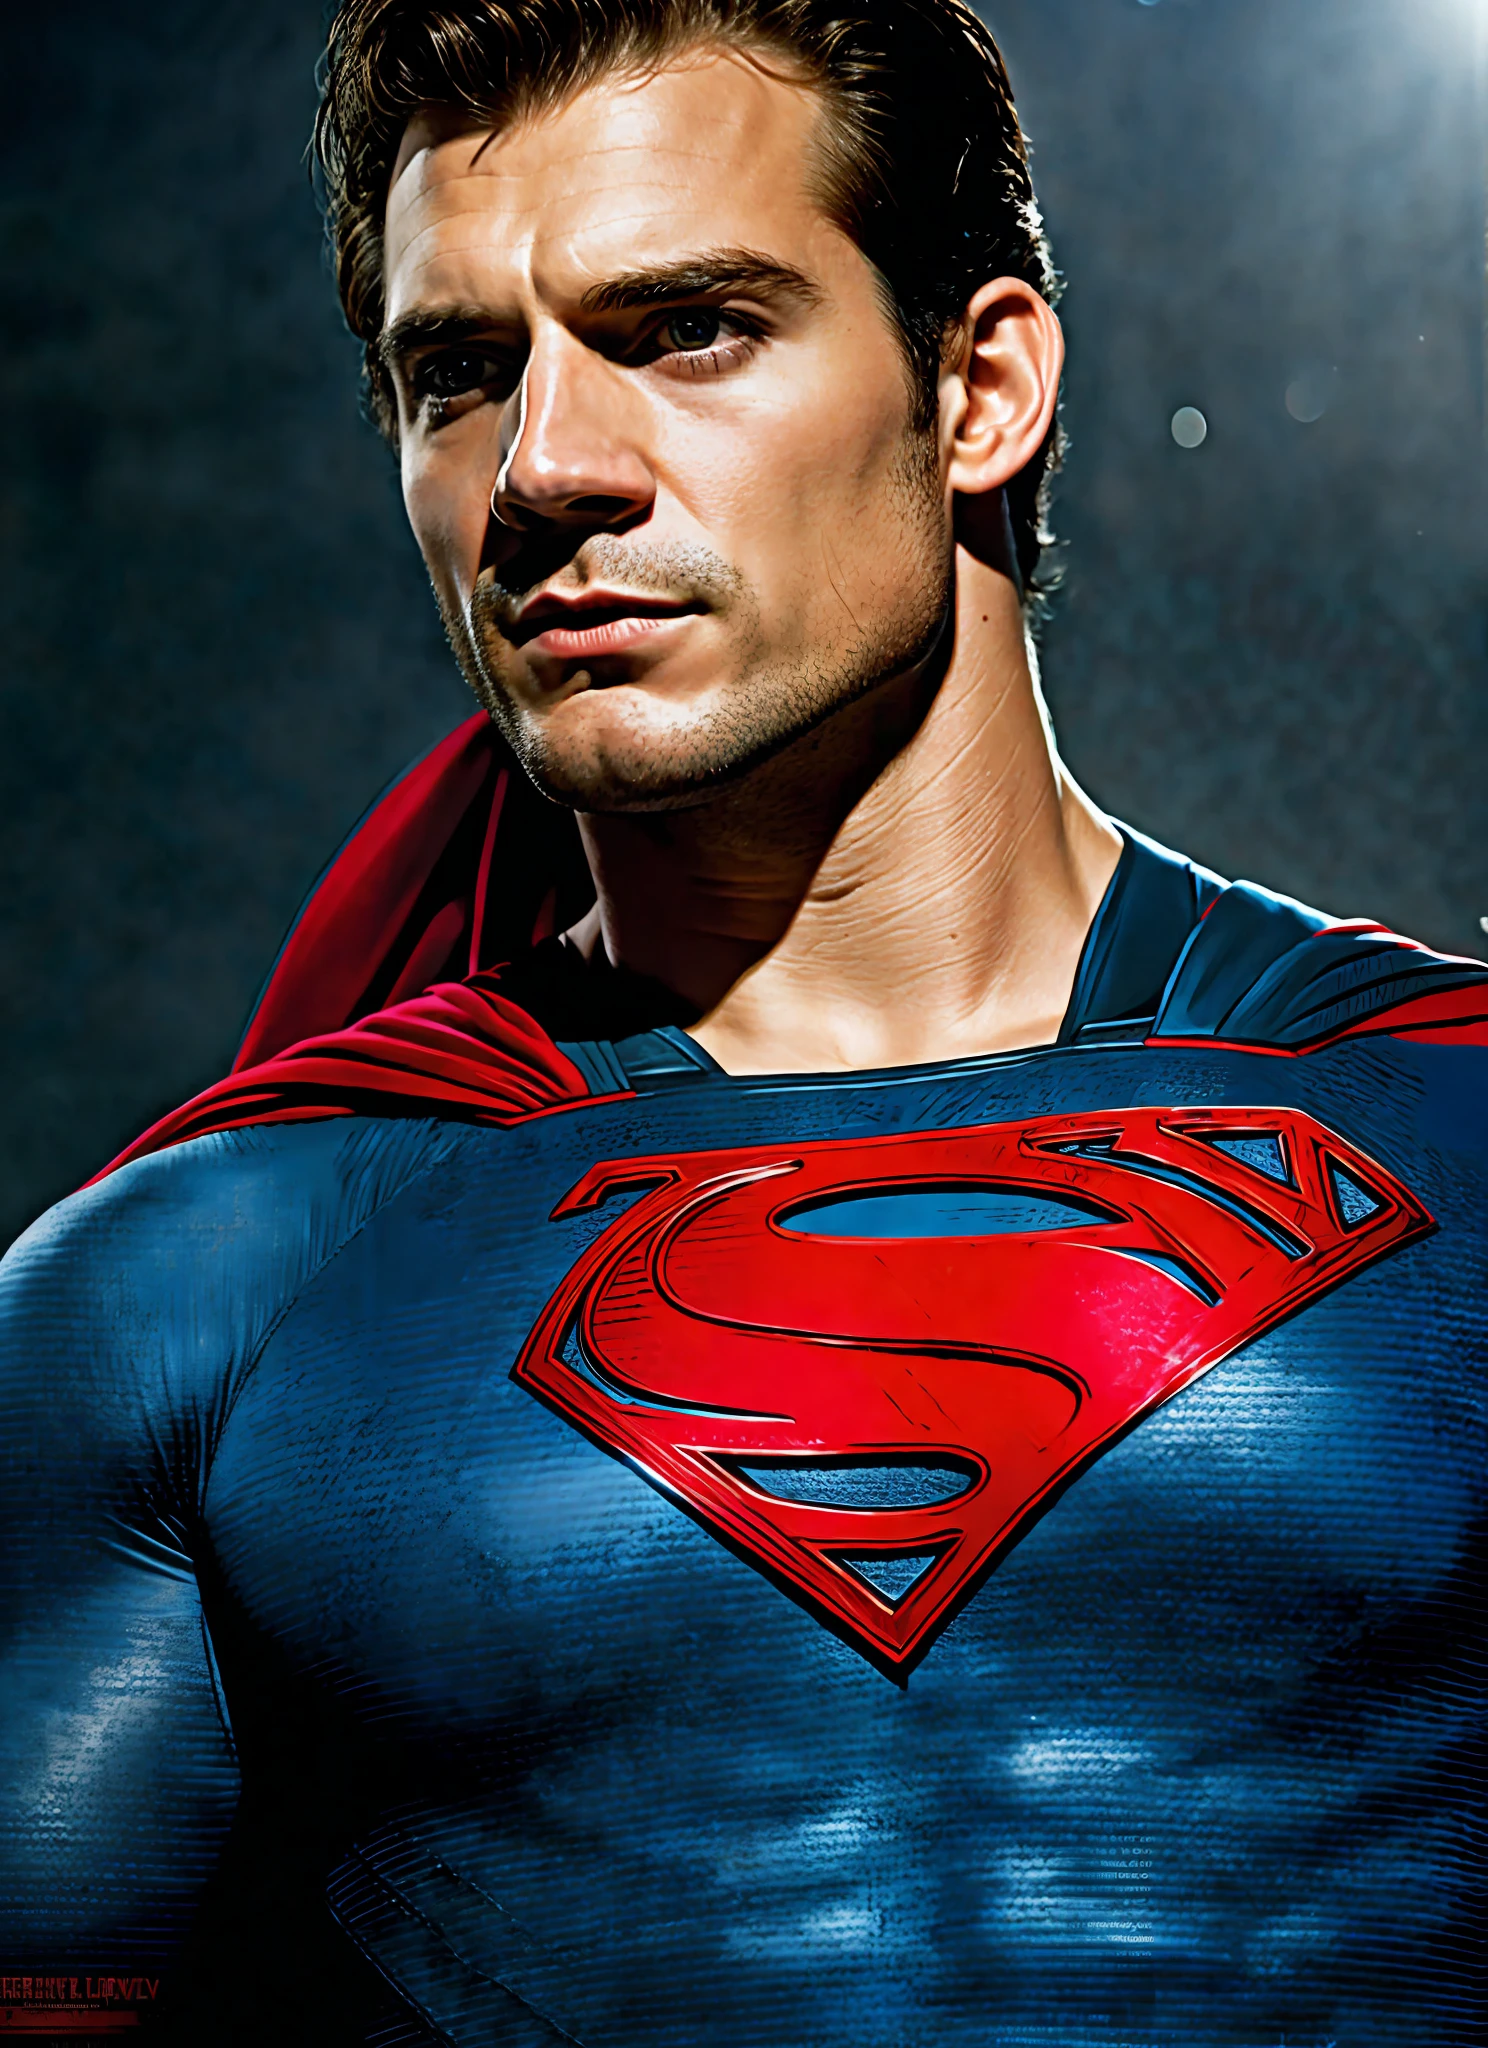 superman in a blue suit with a red cape, herry cavill, henry cavill, henry cavill!!!, superman, justin hartley as superman, textless, portrait of henry cavill, superman pose, henry cavill is a greek god, henry cavill as batman, superman costume, hd wallpaper, henry cavill as james bond, super high resolution, fan art